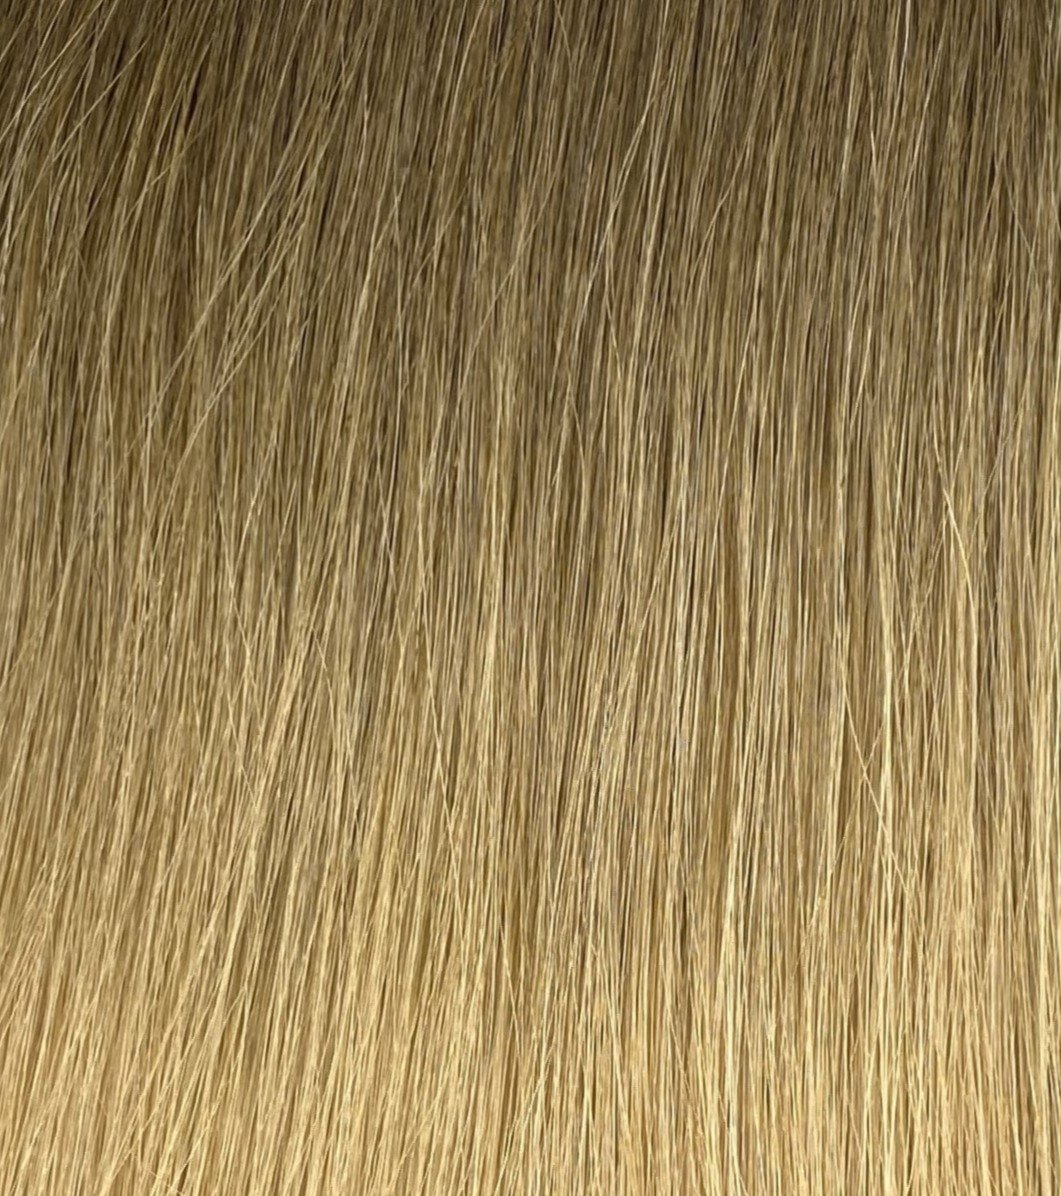 Weft hair extensions #8 & DB4 - Single - 20 inches - Dark Blonde into Dark Golden Blonde Ombre Weft DR Hair Products Co 